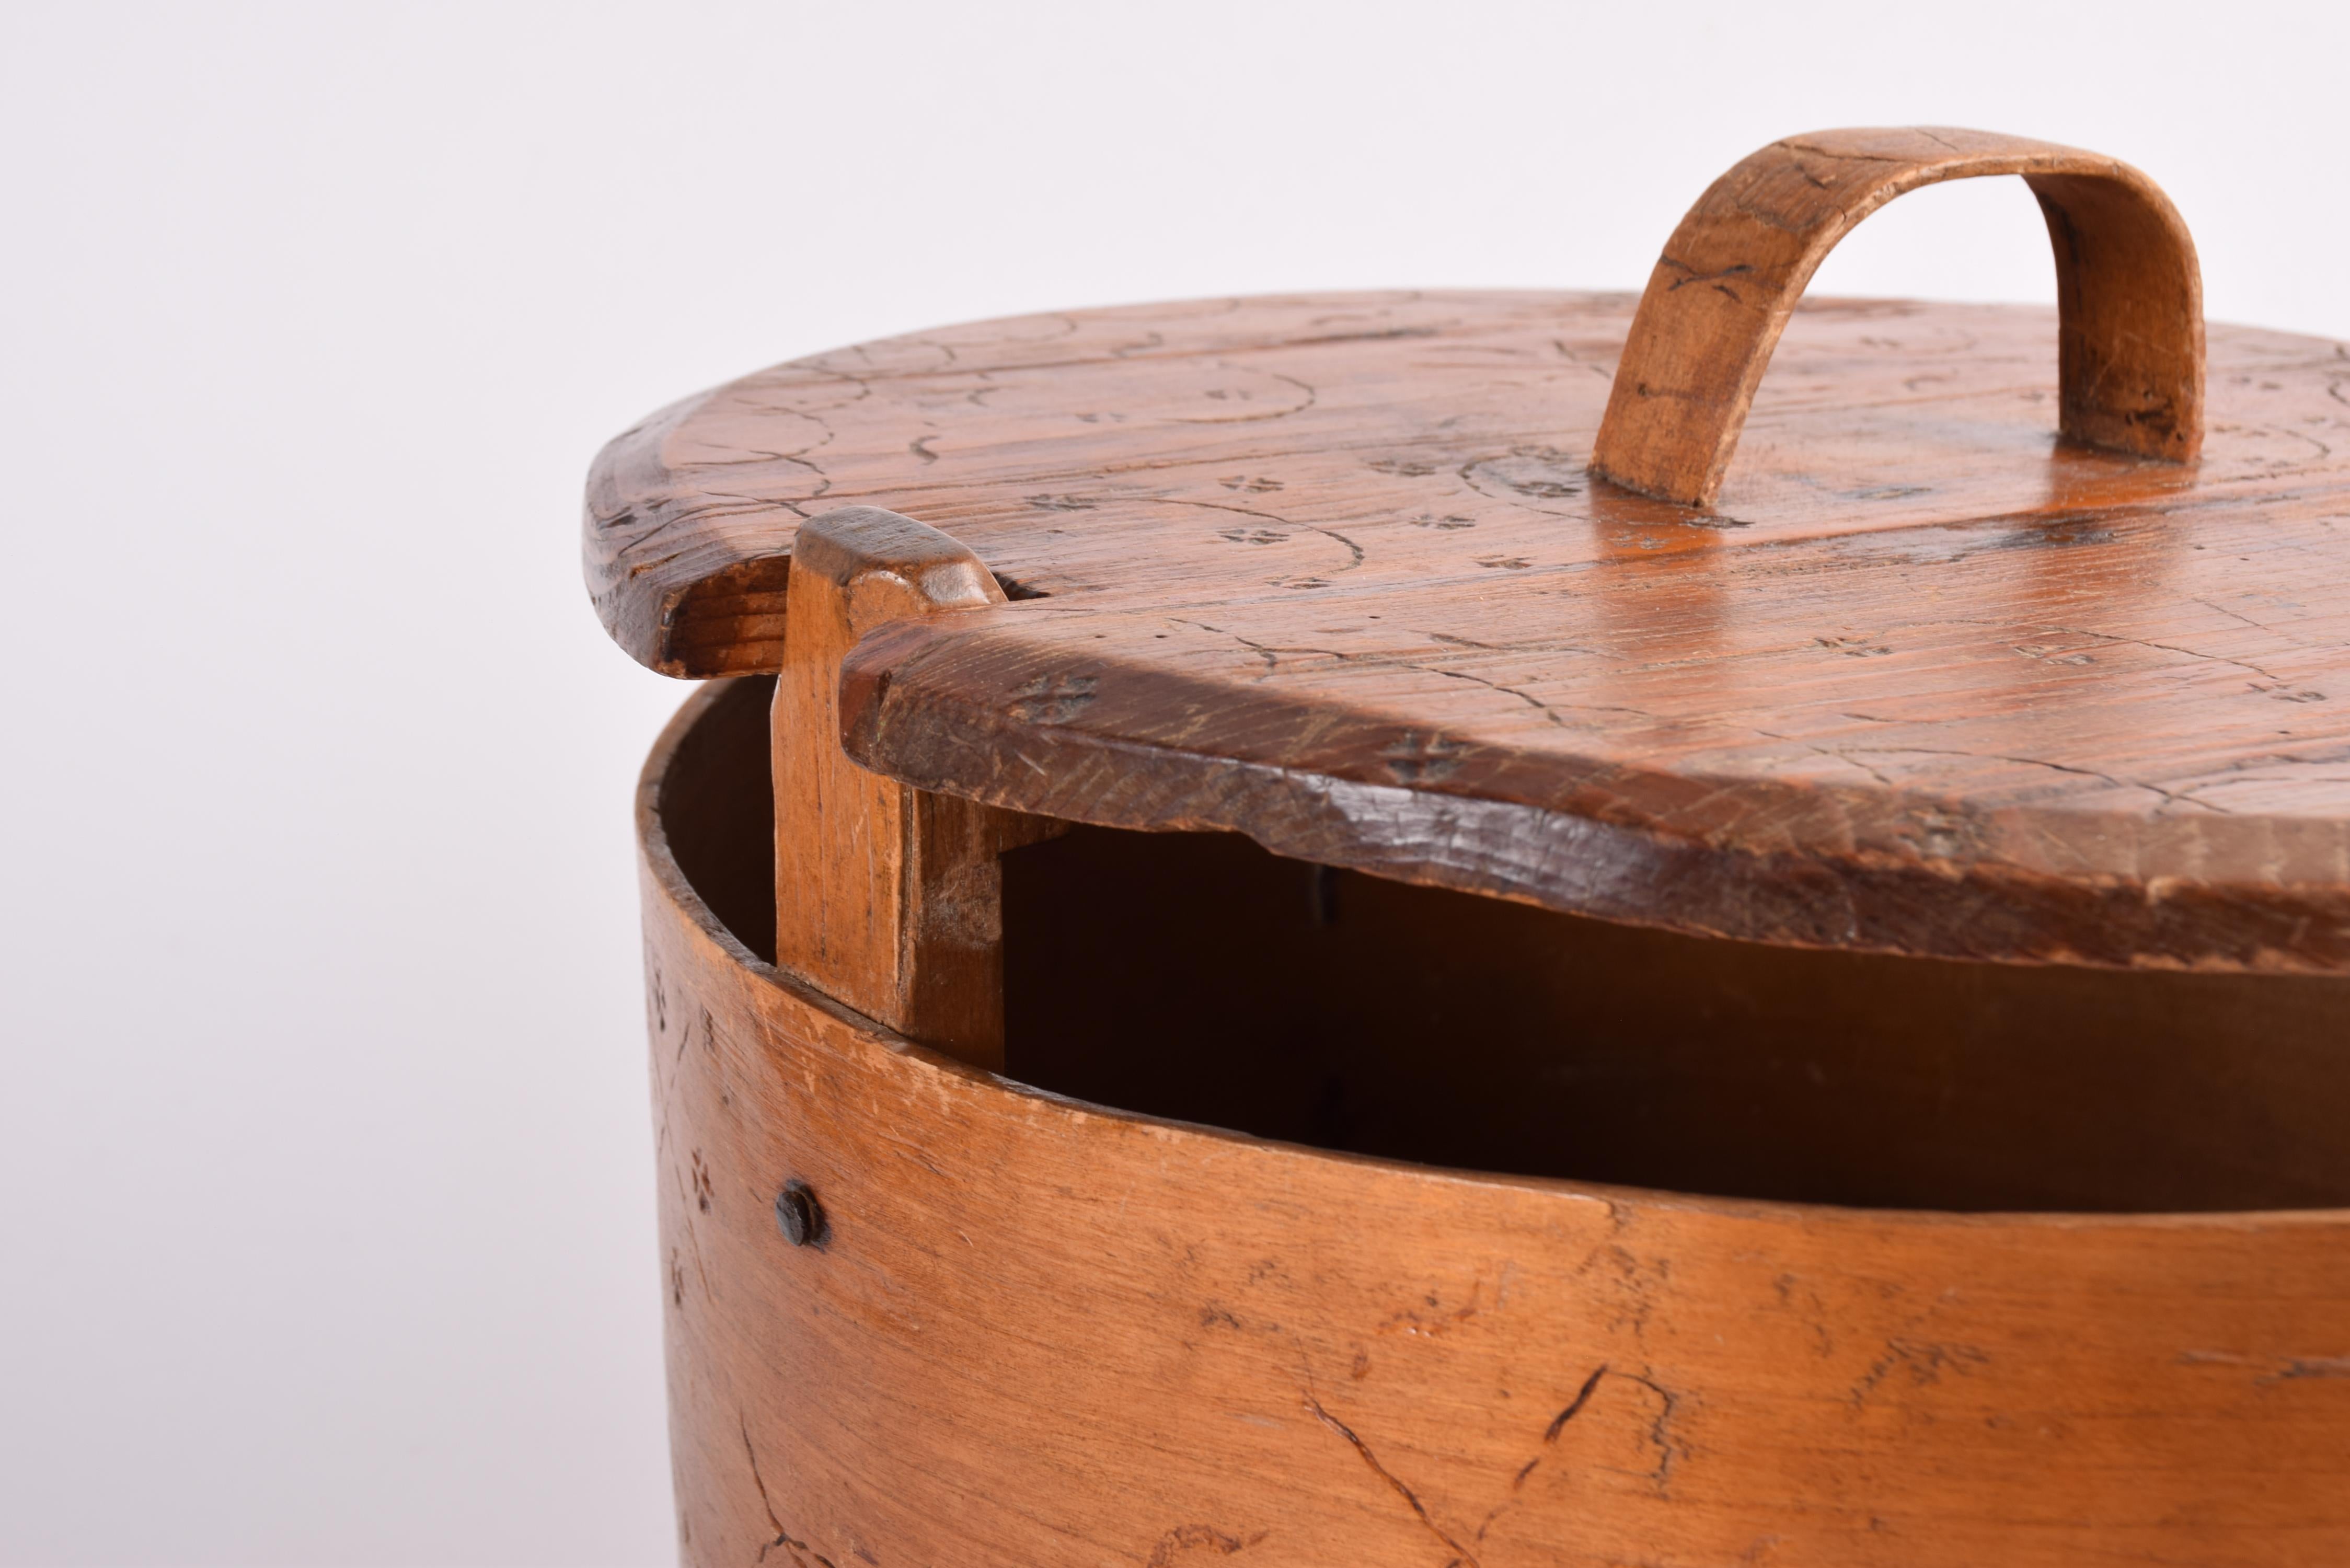 Antique Scandinavian Round Storage Box “Tejne” Decorated Pine, Late 19th Century For Sale 3